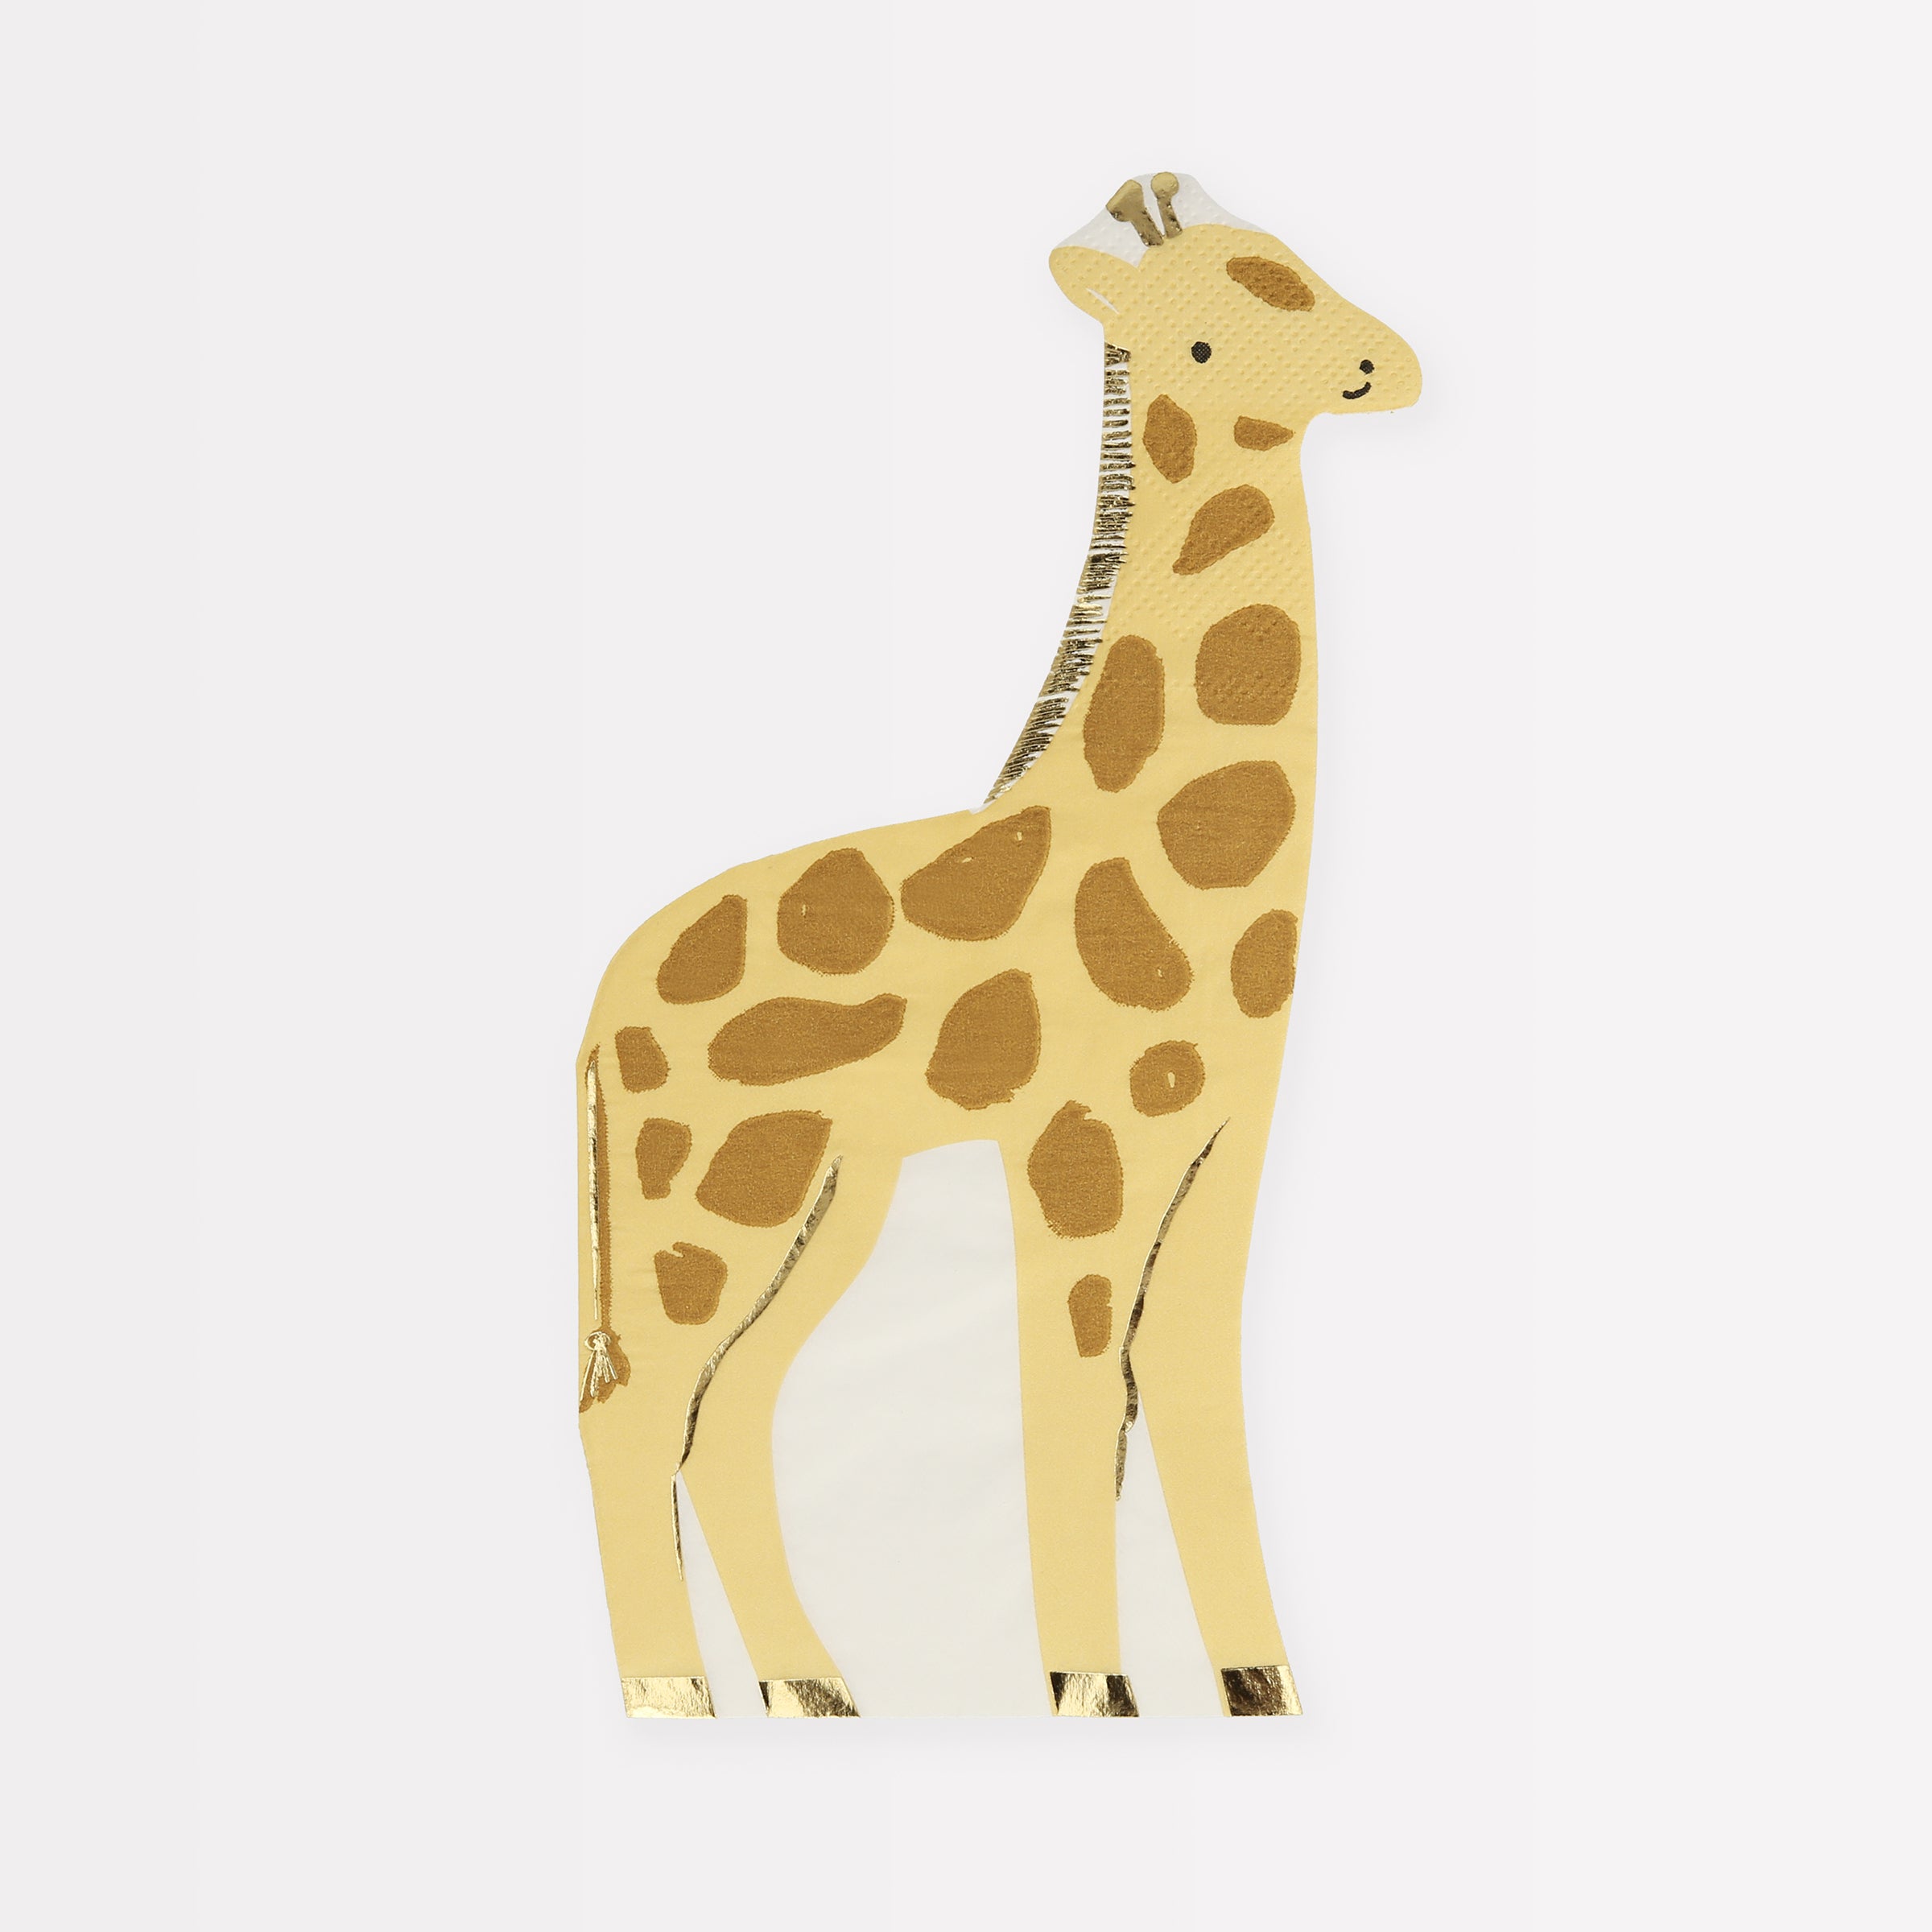 Our party napkins, in the shape of a giraffe with shiny gold foil details, are ideal for safari birthday parties.